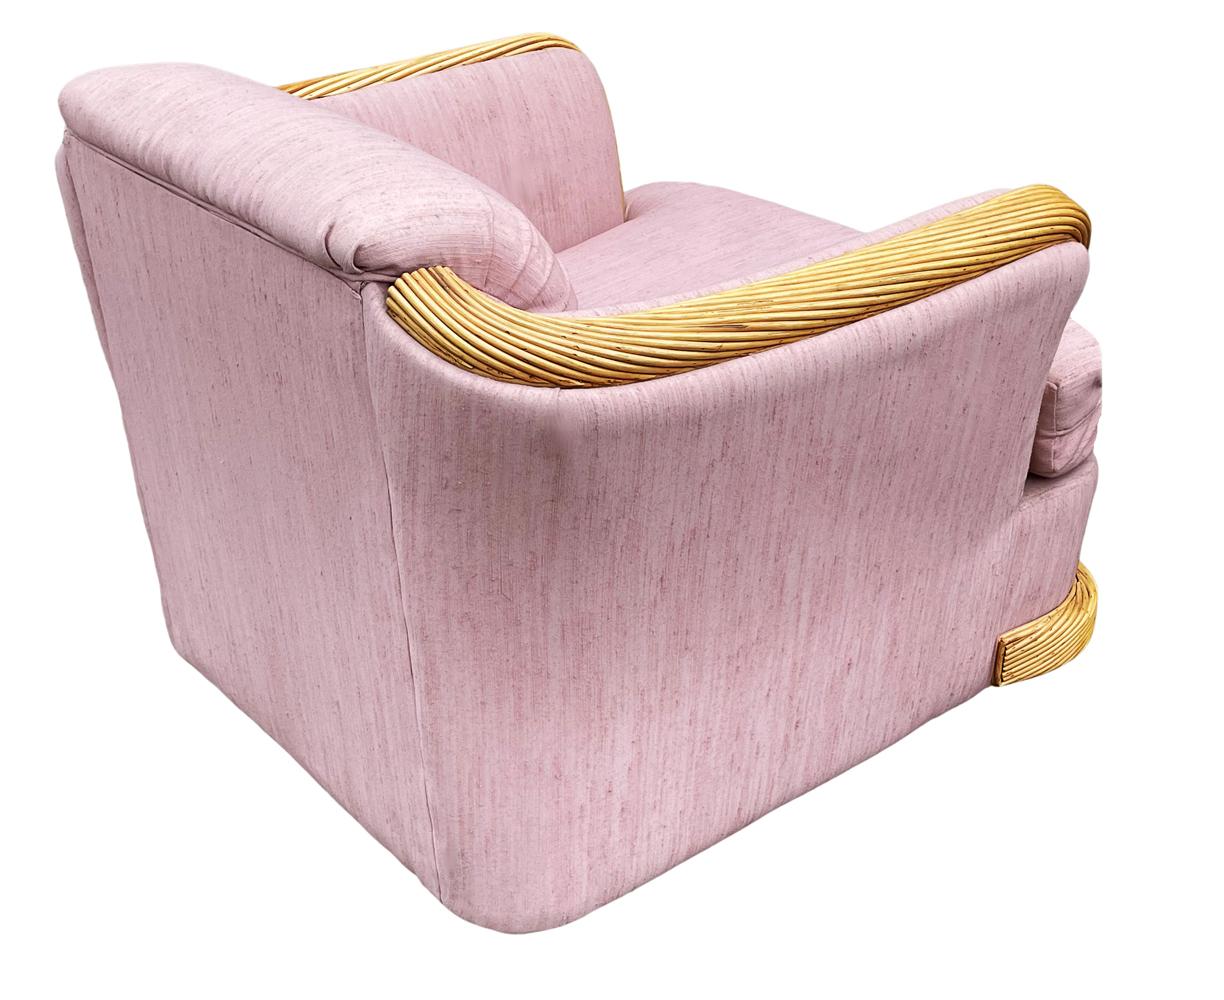 Midcentury Coastal Modern Rattan Club or Lounge Chair with Pink Fabric For Sale 2